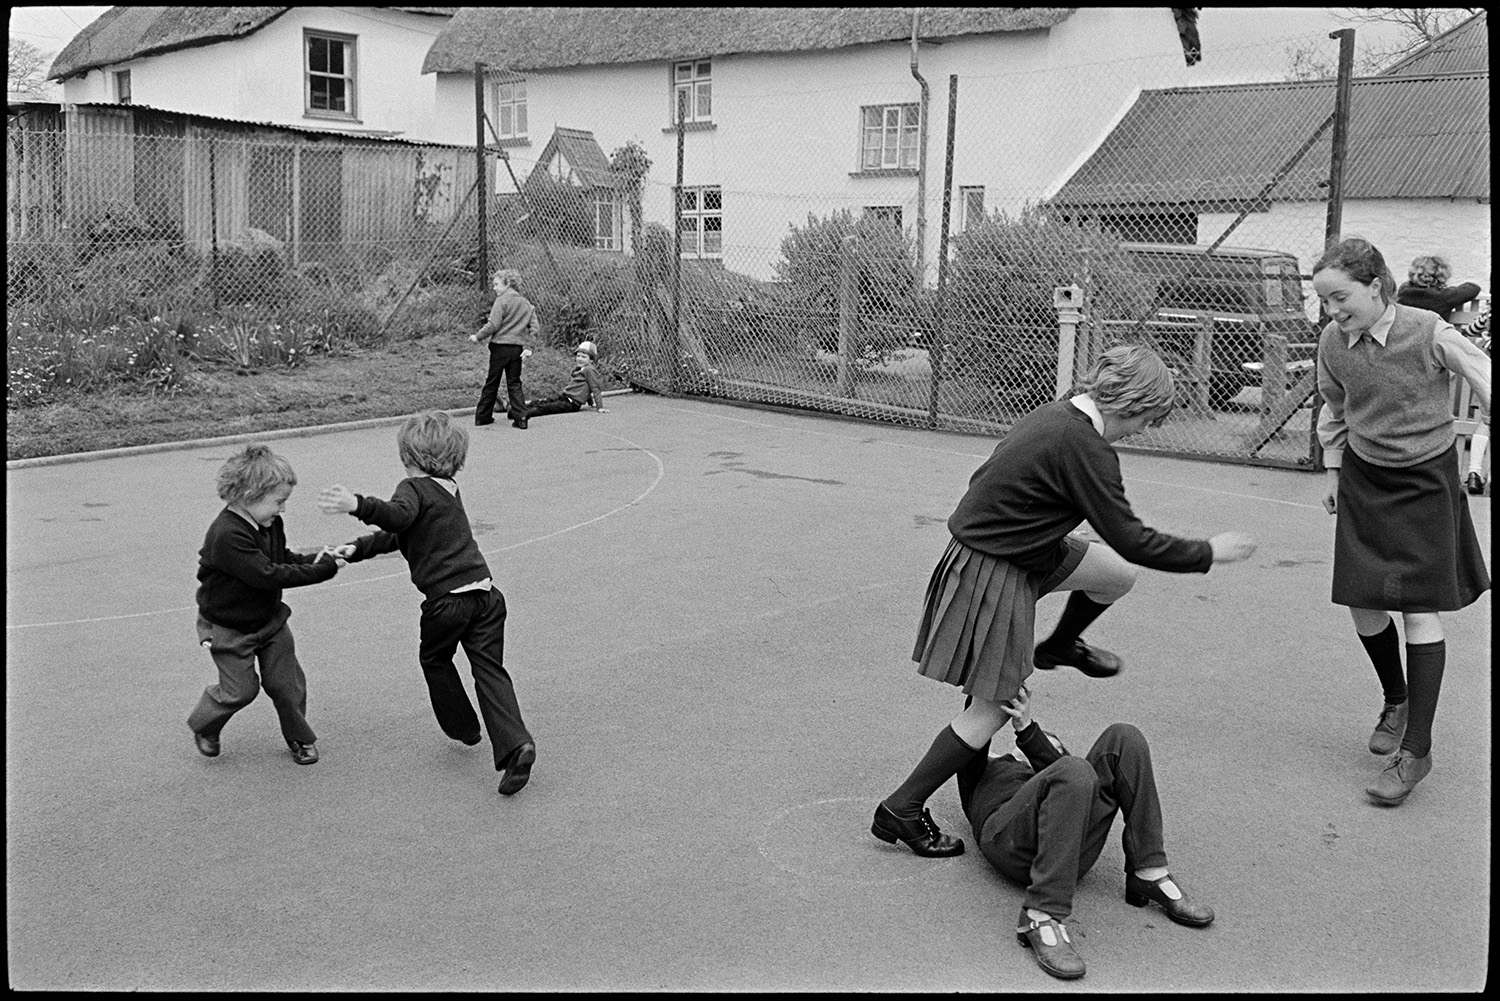 In and out of school with children playing. 
[Schoolchildren playing in the playground at Kings Nympton Primary School. A thatched cottage is visible behind the school fence.]